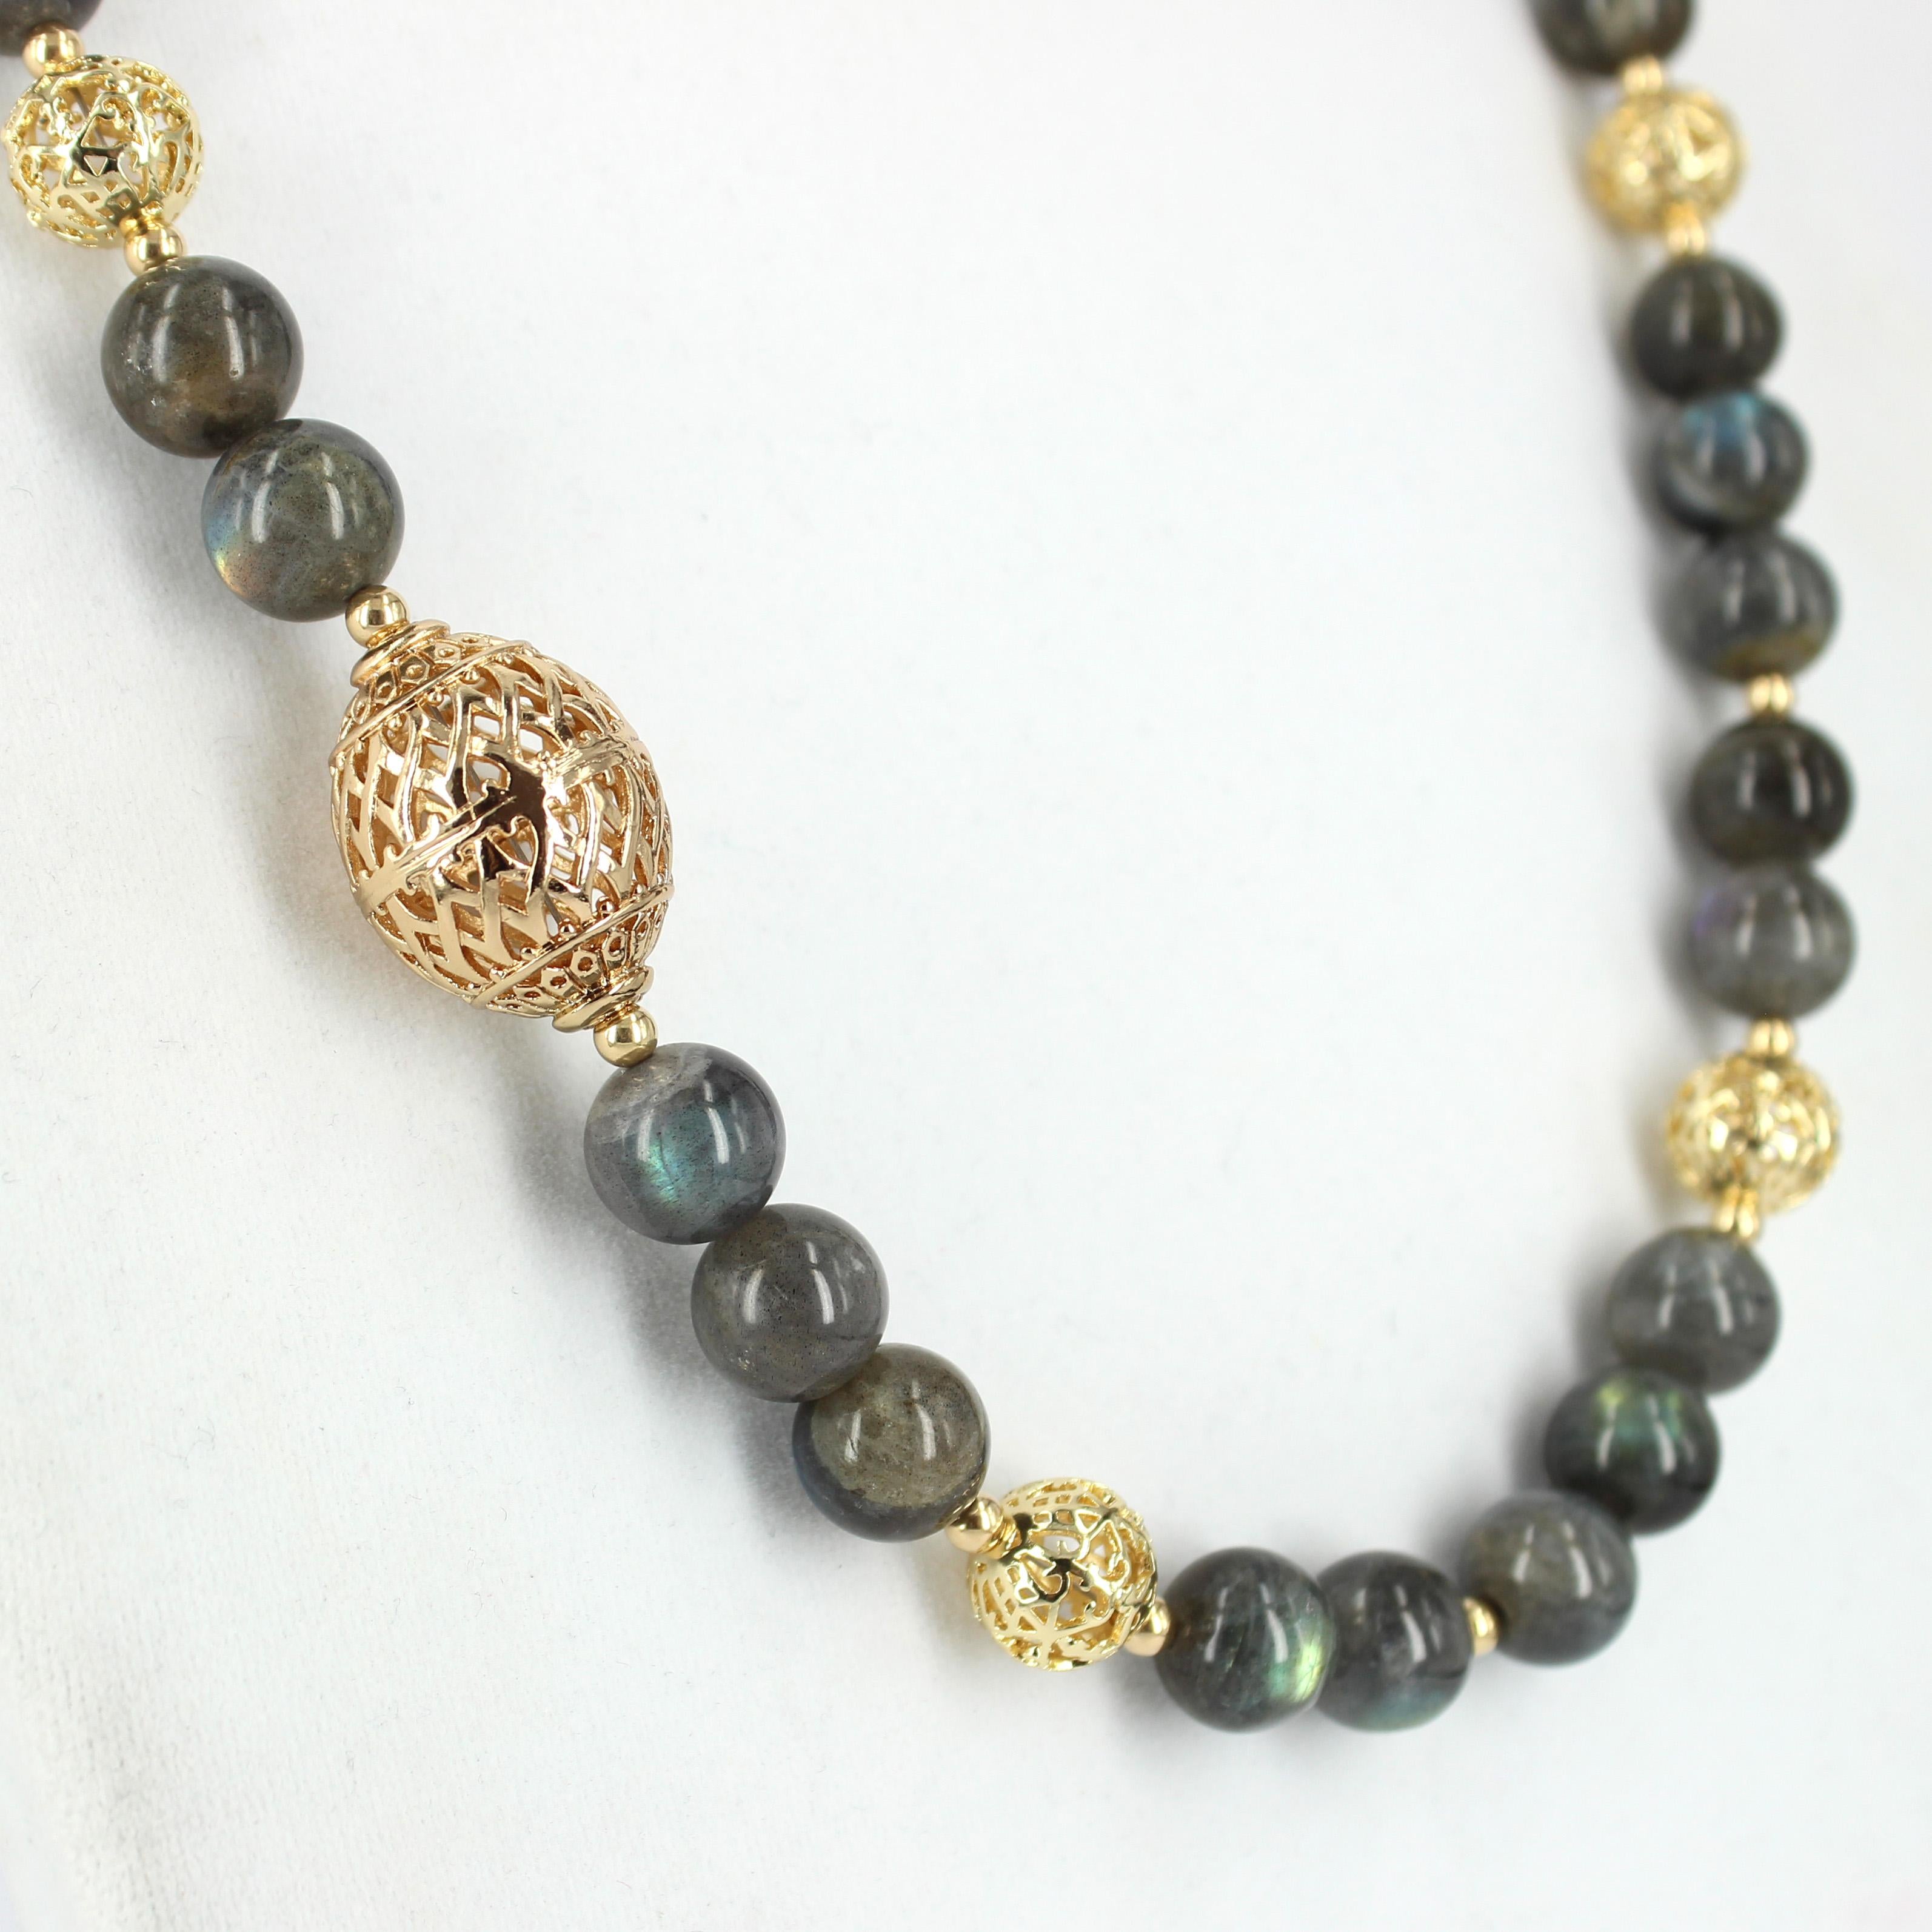 Dress to impress with this elegant statement piece, Natural Labradorite 12mm necklace features 33 polished beads, Gold filled filigree beads ranges,  4mm round, 12mm, round, 26x20mm oval, finished with Sterling Silver gold plated hook clasp. 

Total